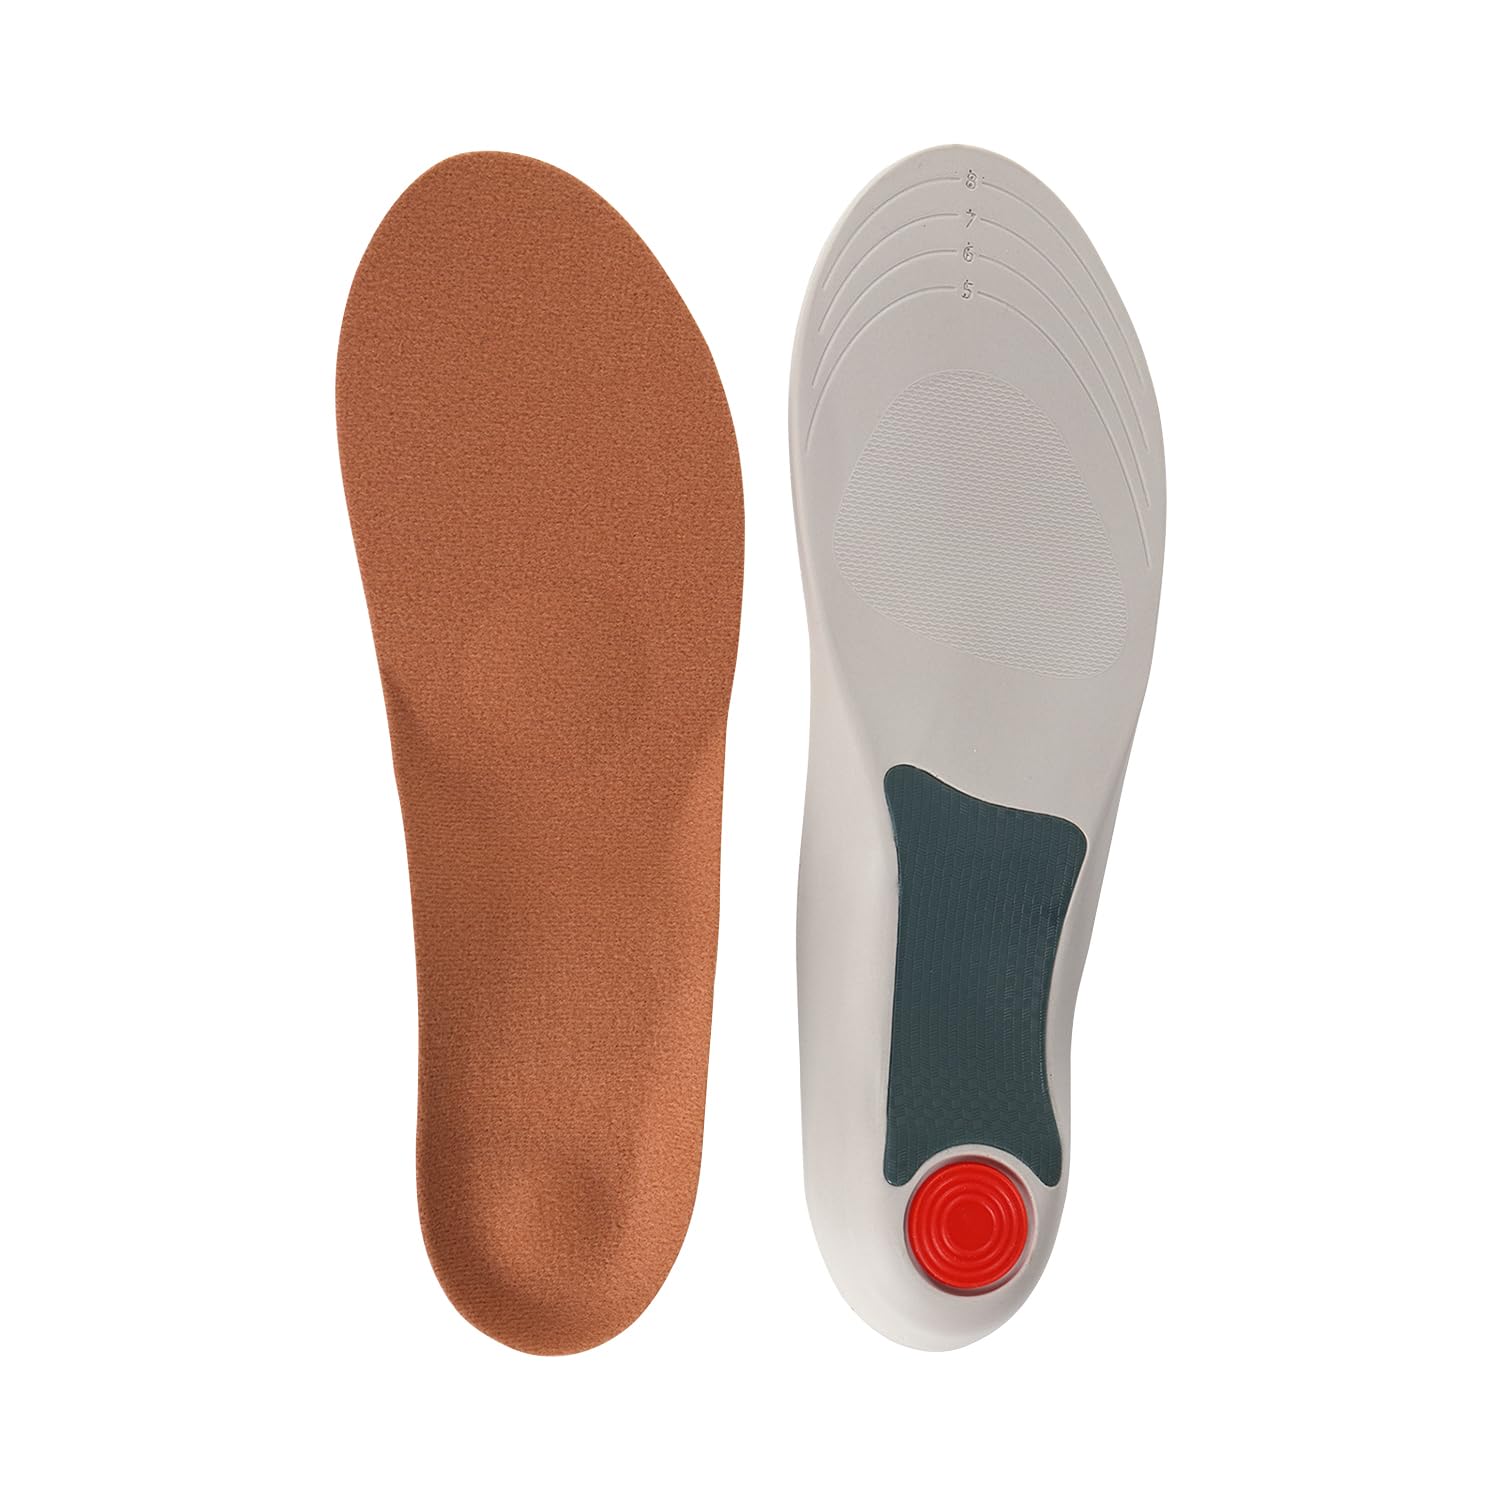 Dr Foot Orthotics for Lower Back Pain Insoles | For Lower Back Pain, Arch Support |Shock Absorbing |Relief - Alleviate Discomfort in the Lower Back | For Men & Women - 1 Pair - (Large Size)